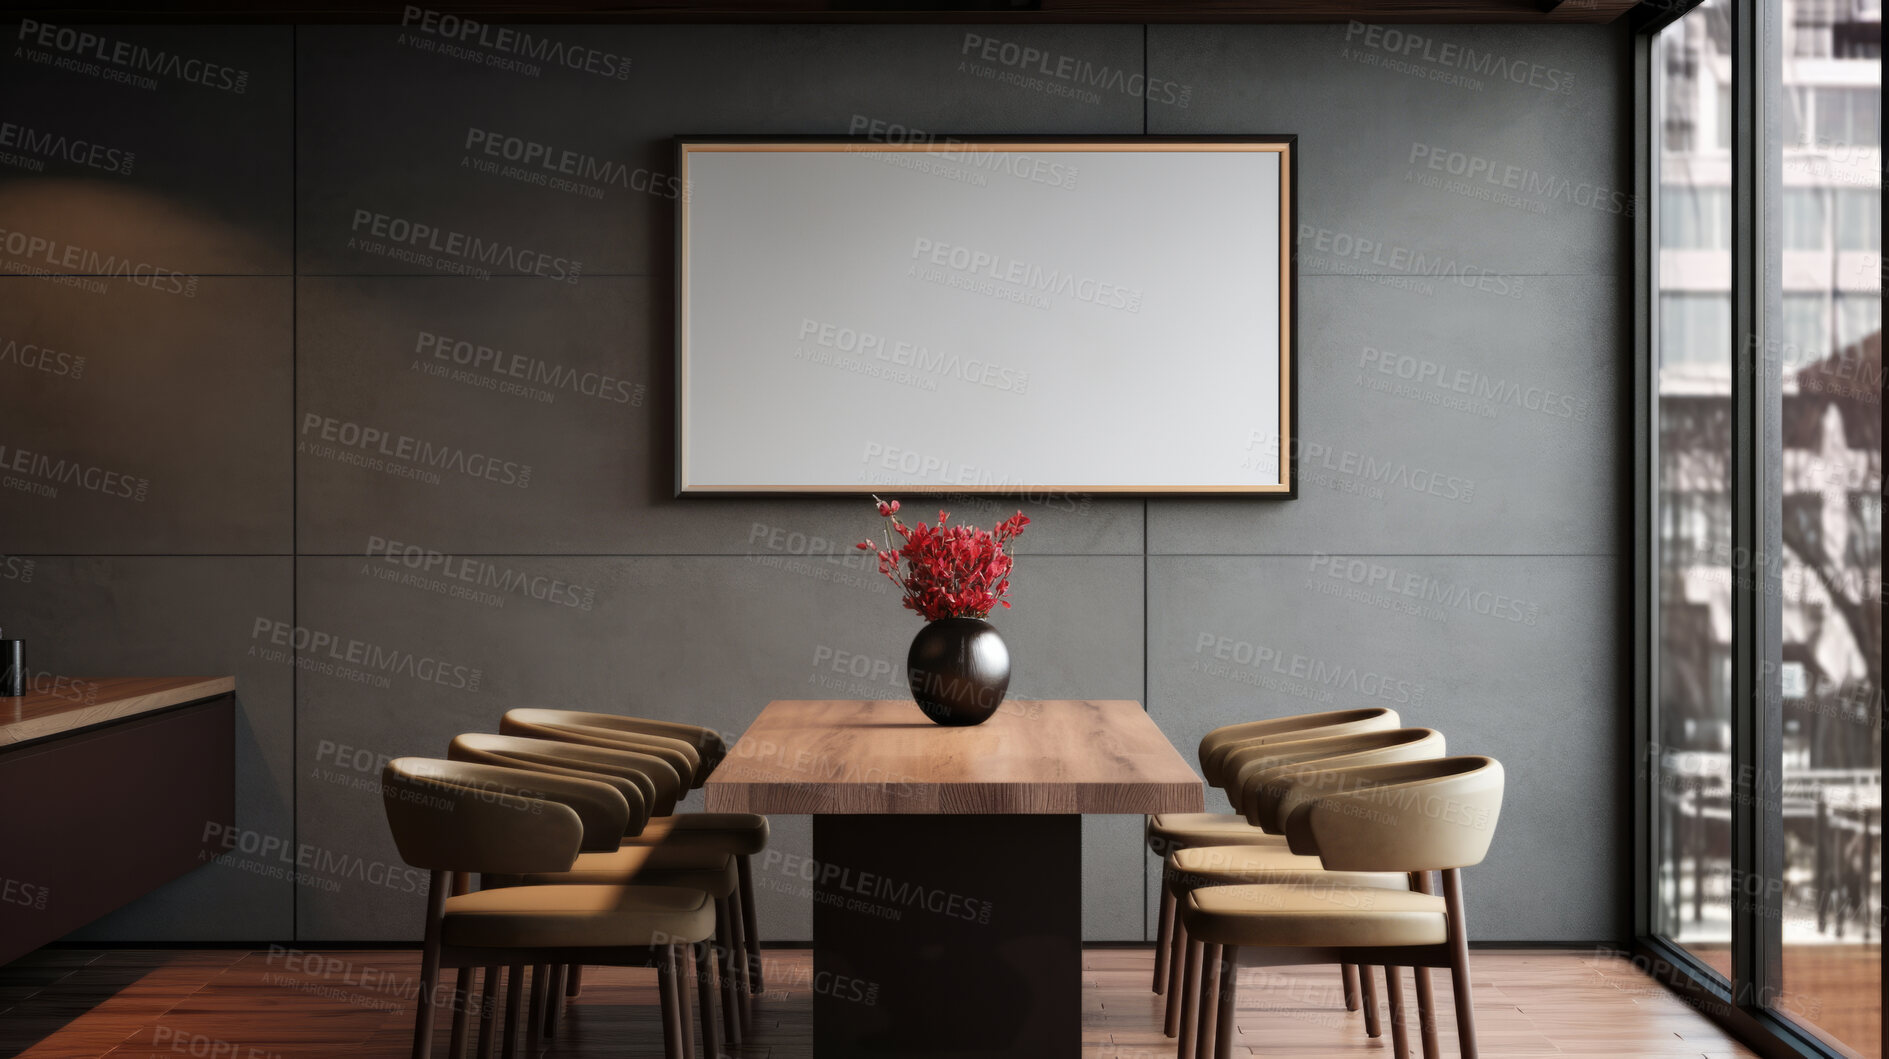 Buy stock photo Furniture, dining room and modern table with wood chairs for apartment, hotel and home picture frame. Creative, interior design and mockup poster space for restaurant, dinner and decor inspiration